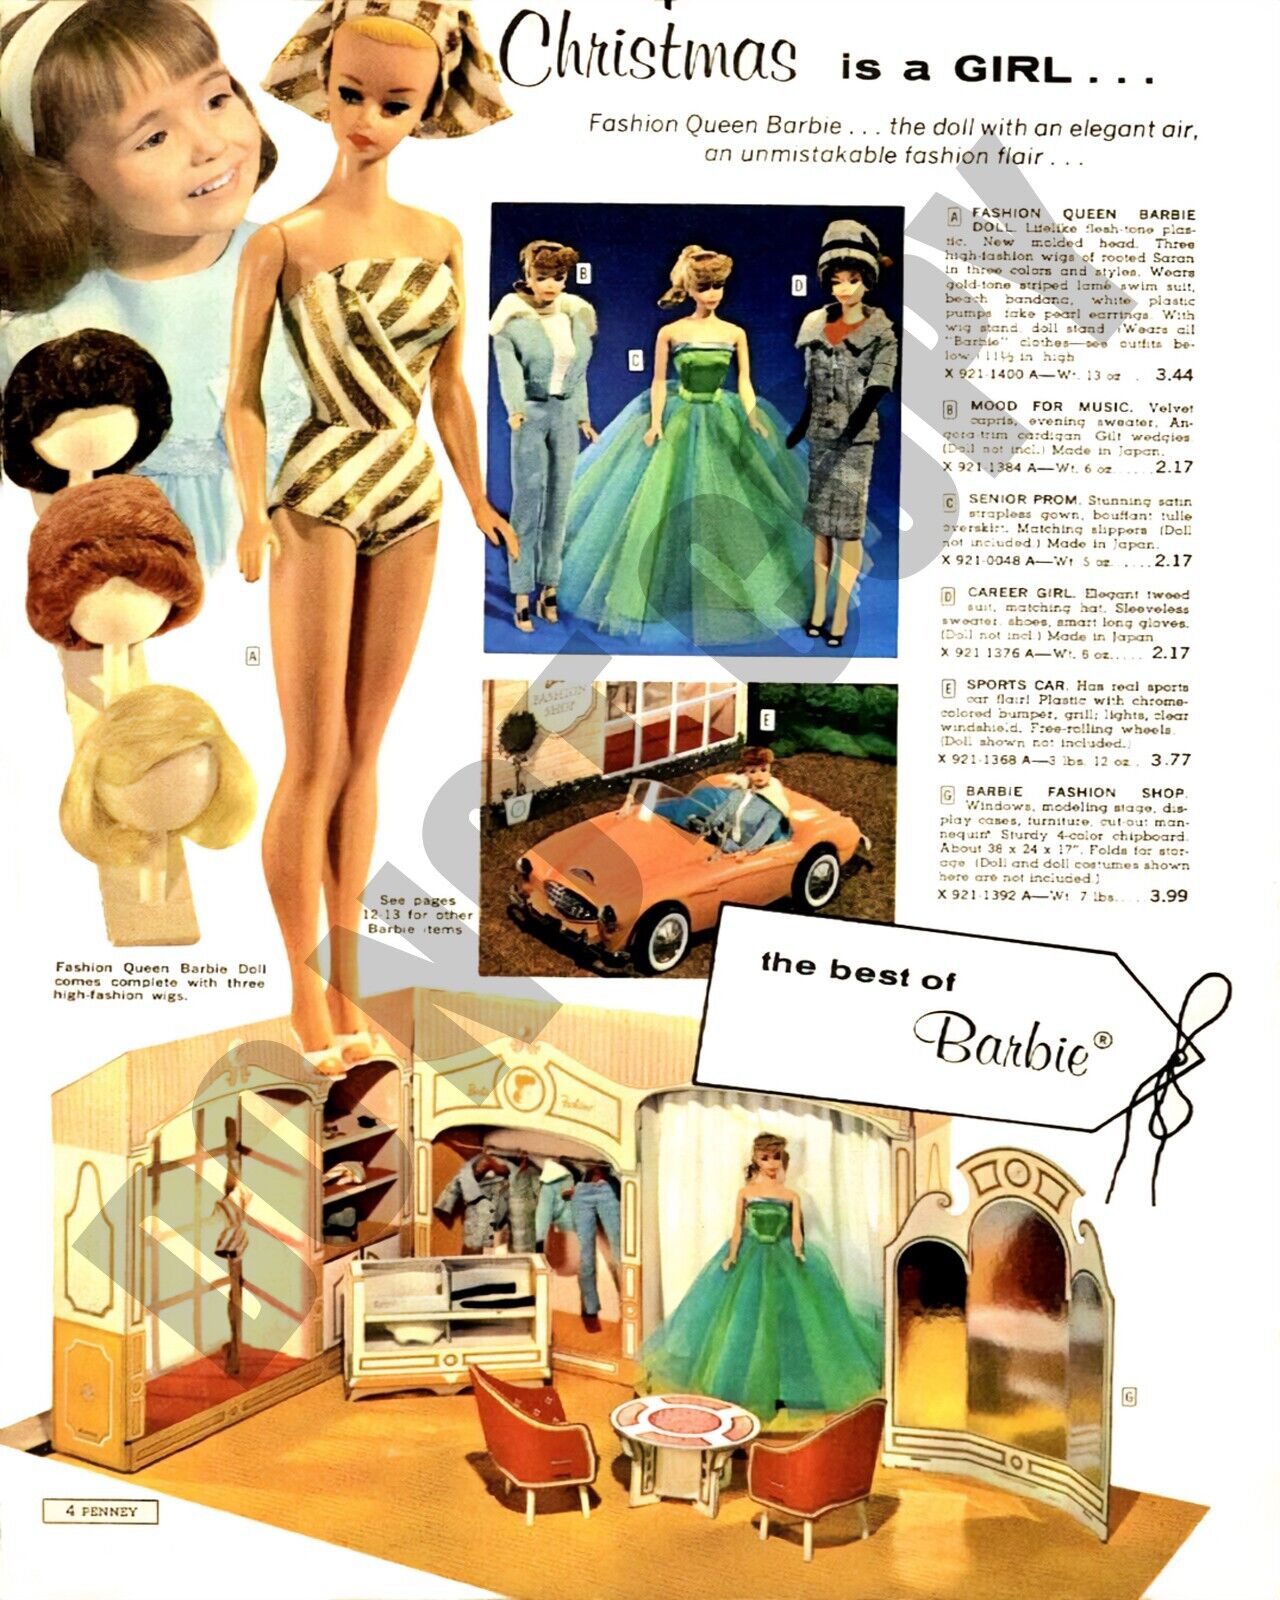 JC Penny Catalog Page For Fashion Queen Barbie Doll Accessories Ad 8x10 Photo